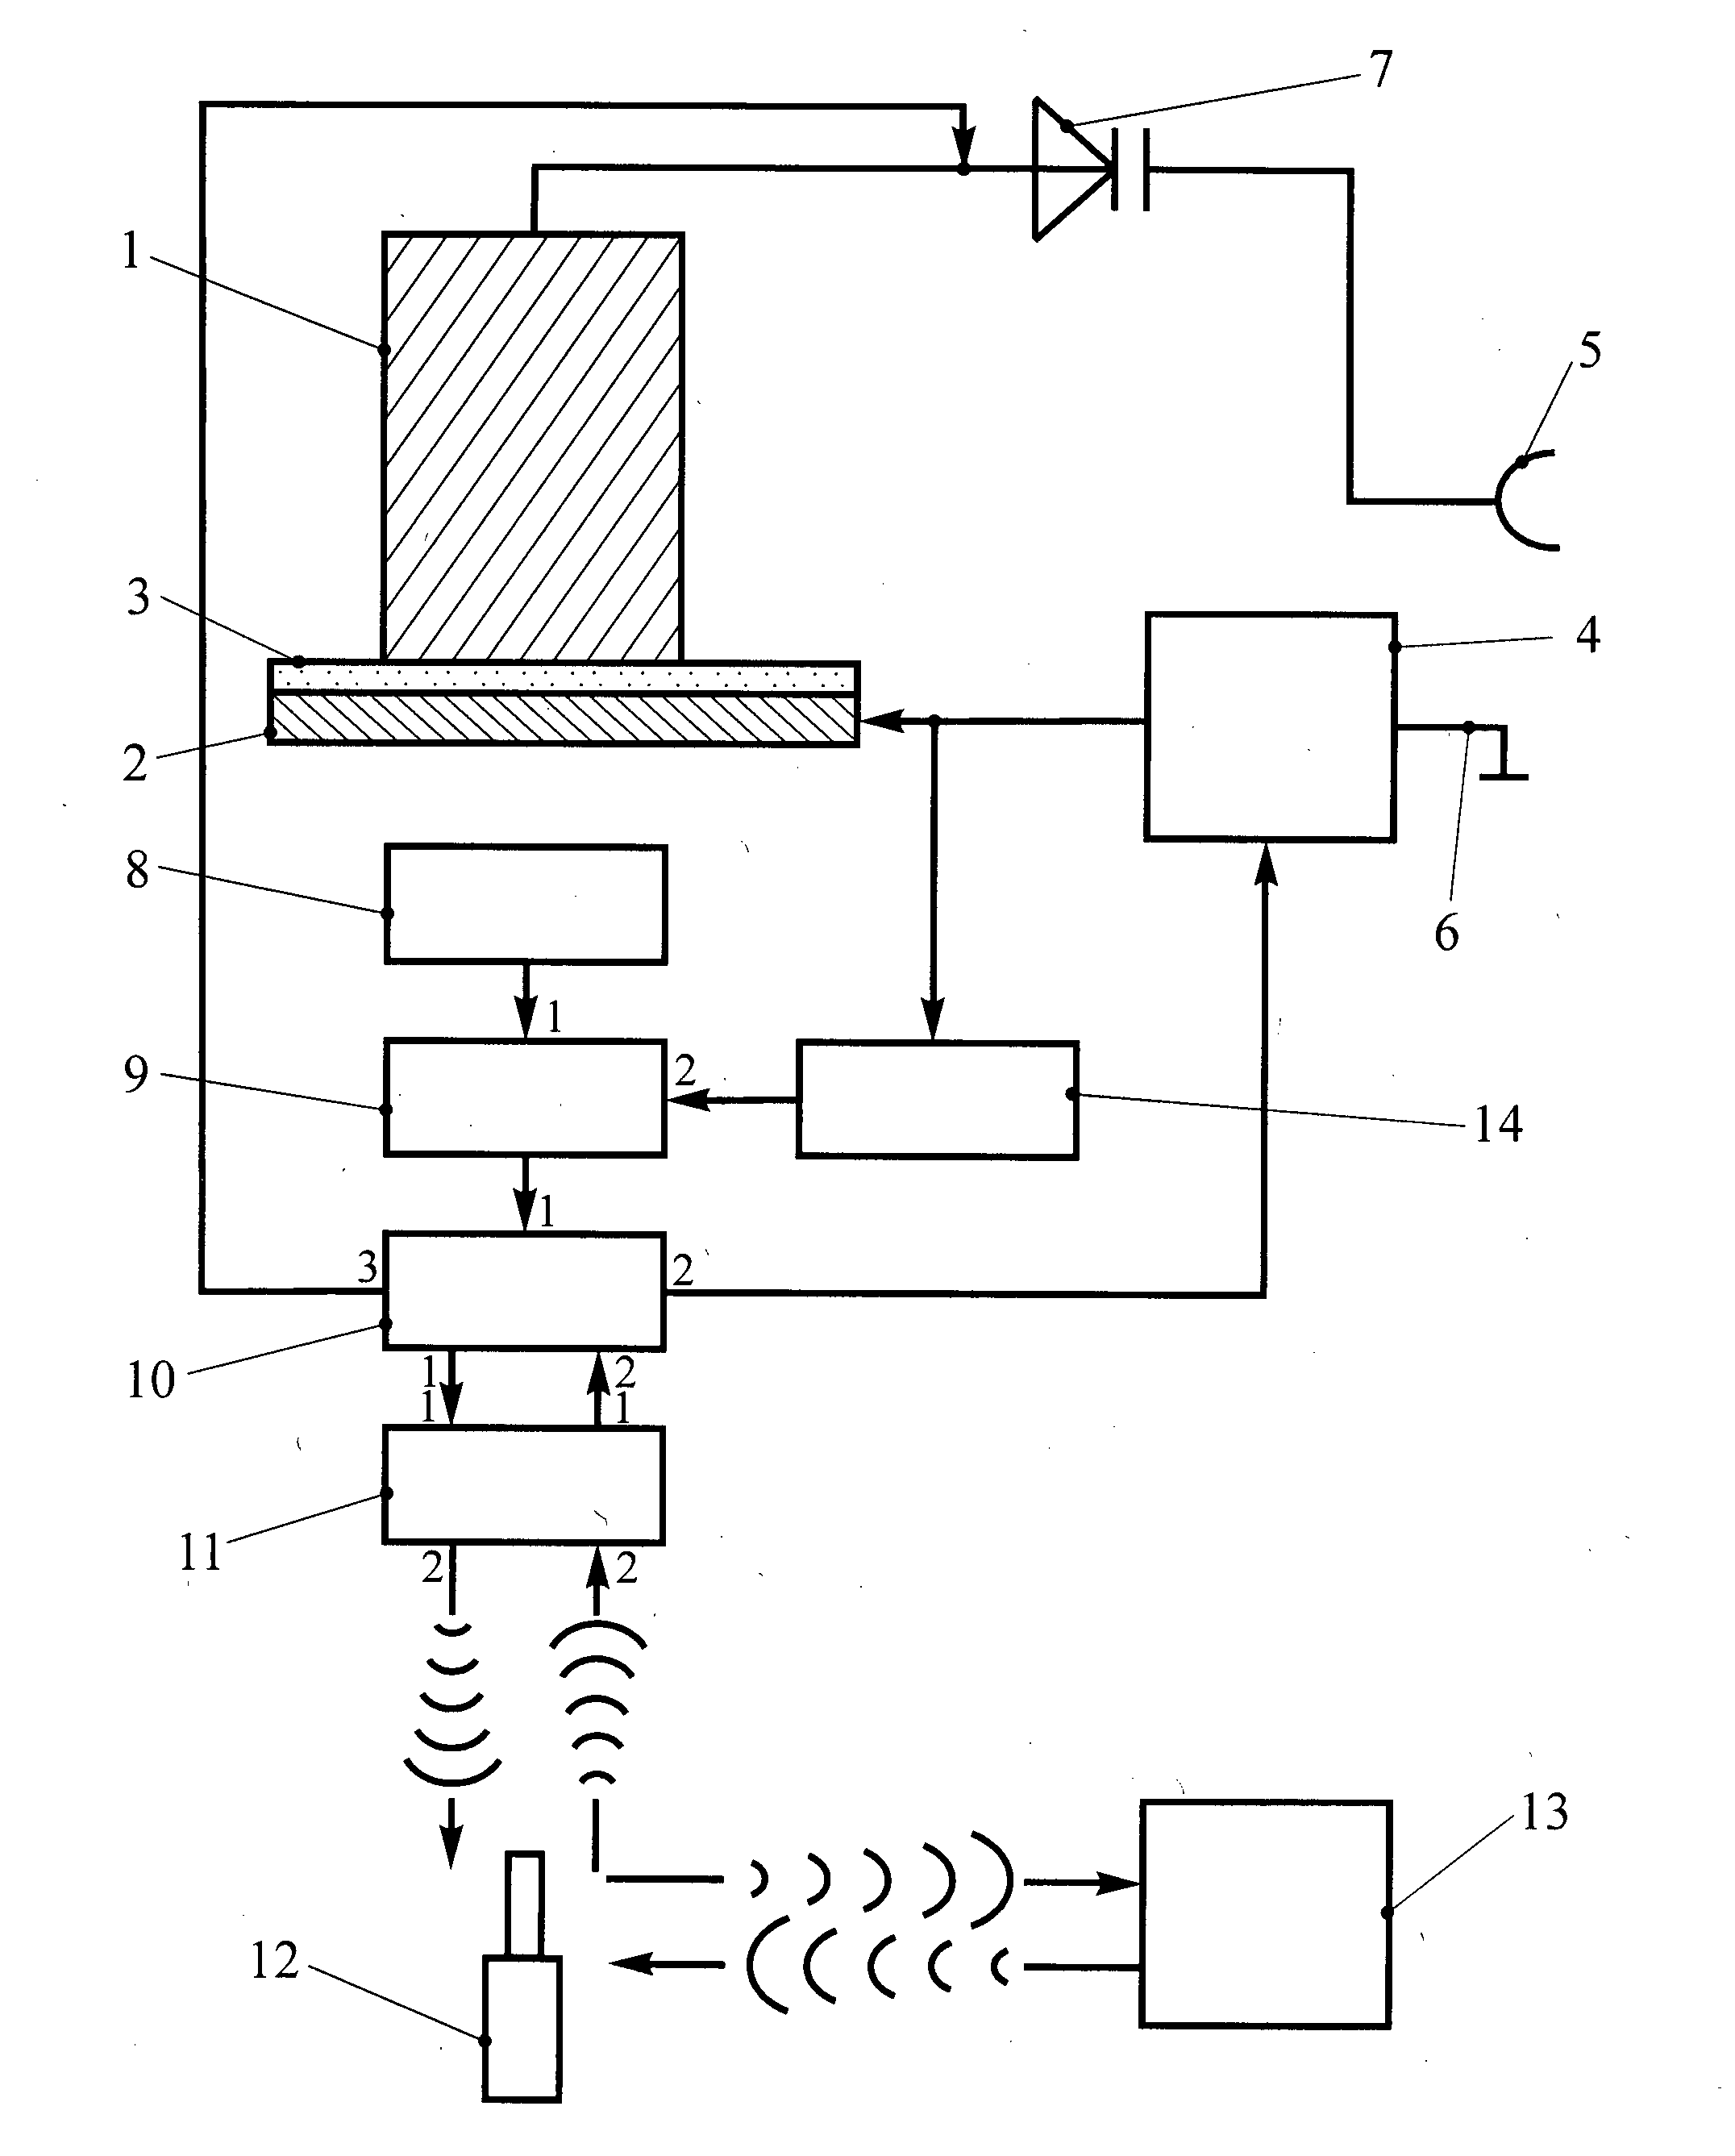 Device for Measuring Electromagnetic Field Intensity